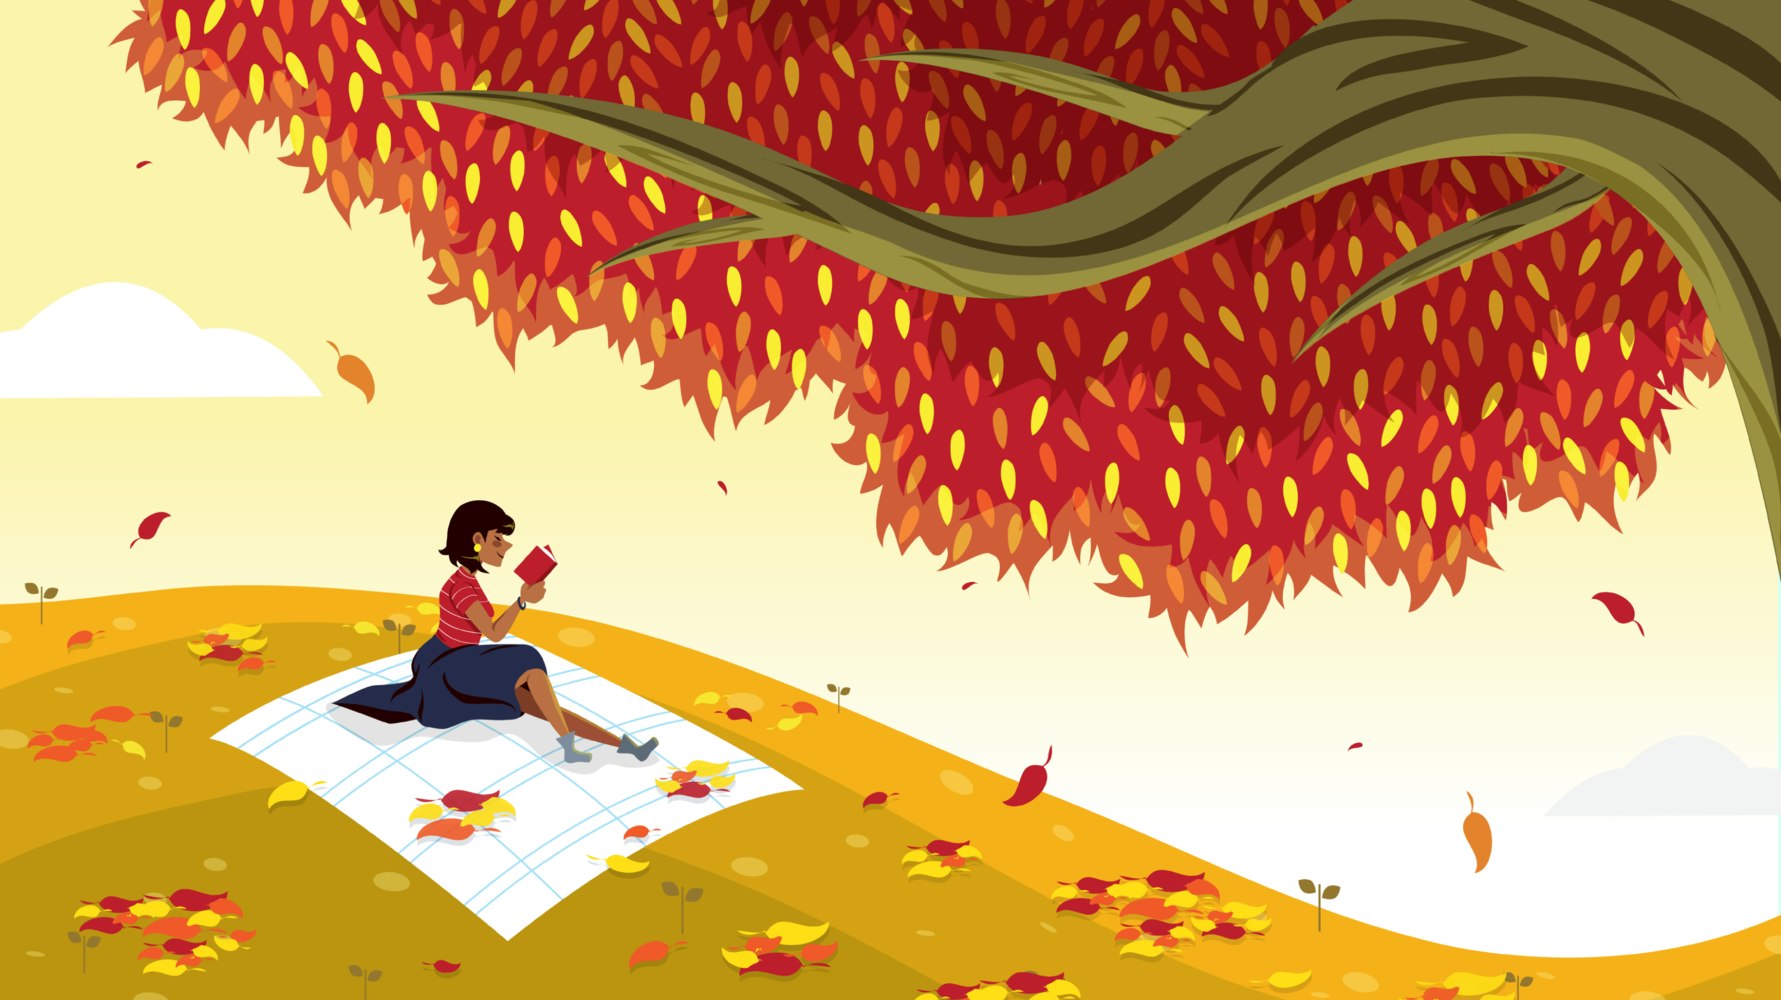 Woman reading a book next to an autumnal tree with falling leaves